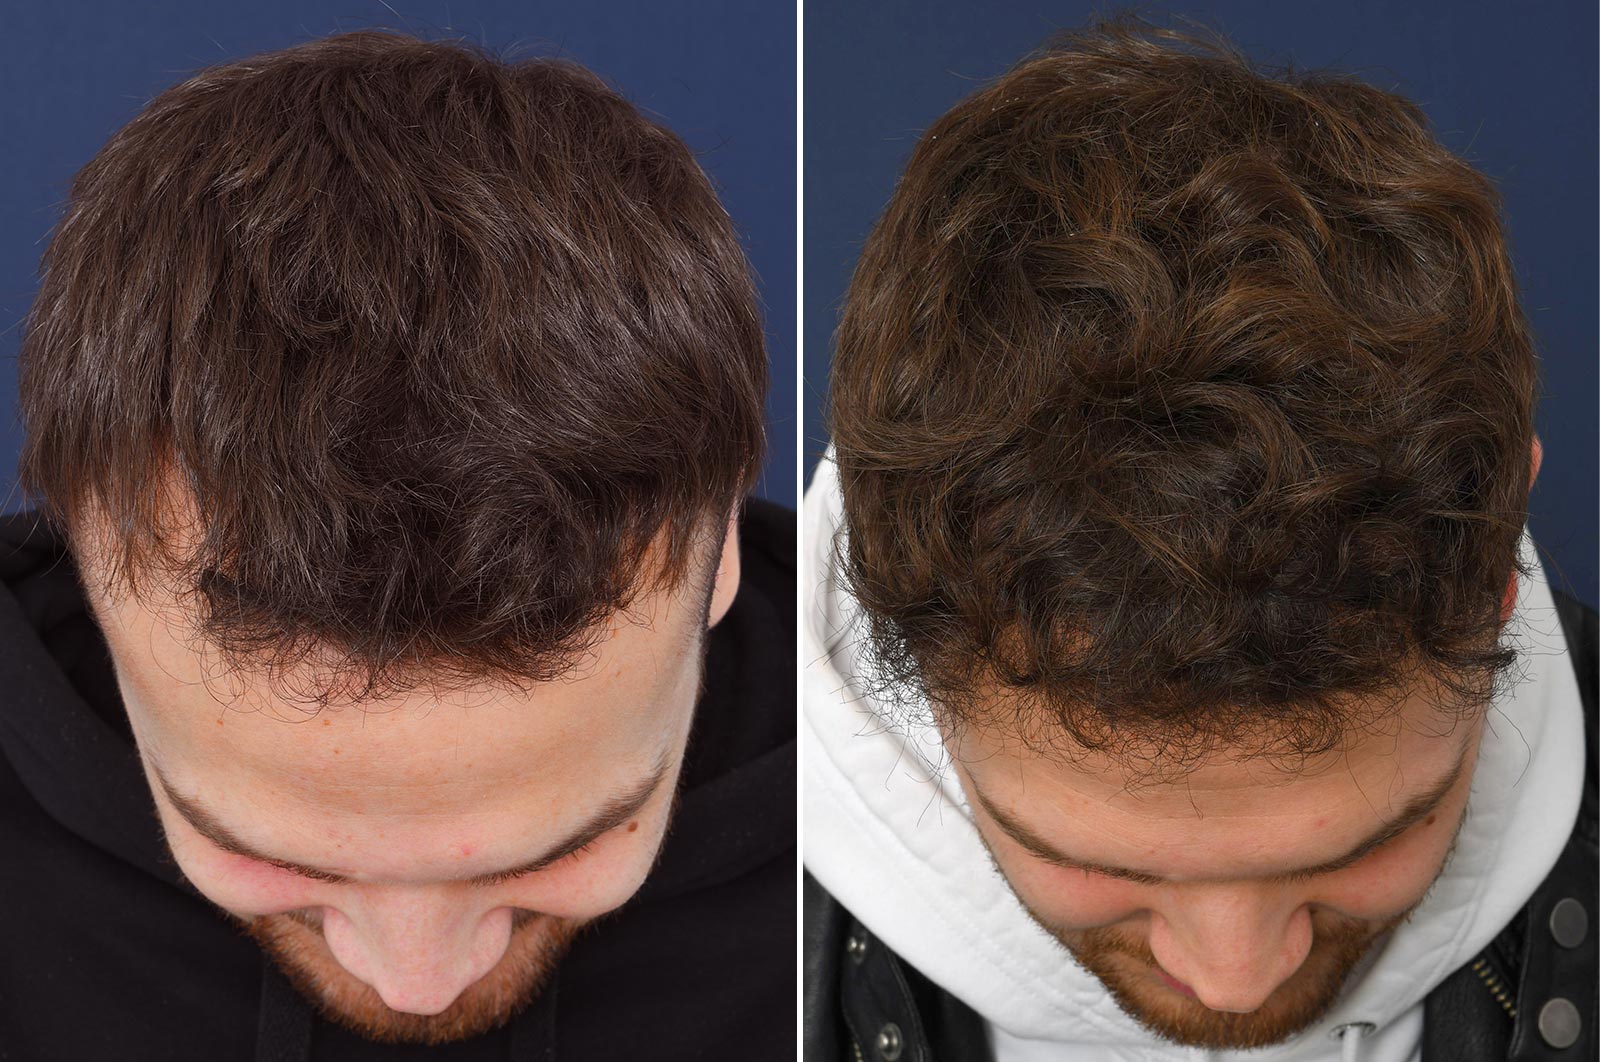 Hair transplant - The No-shave FUE method or long hair transplantations -  2pass Clinic